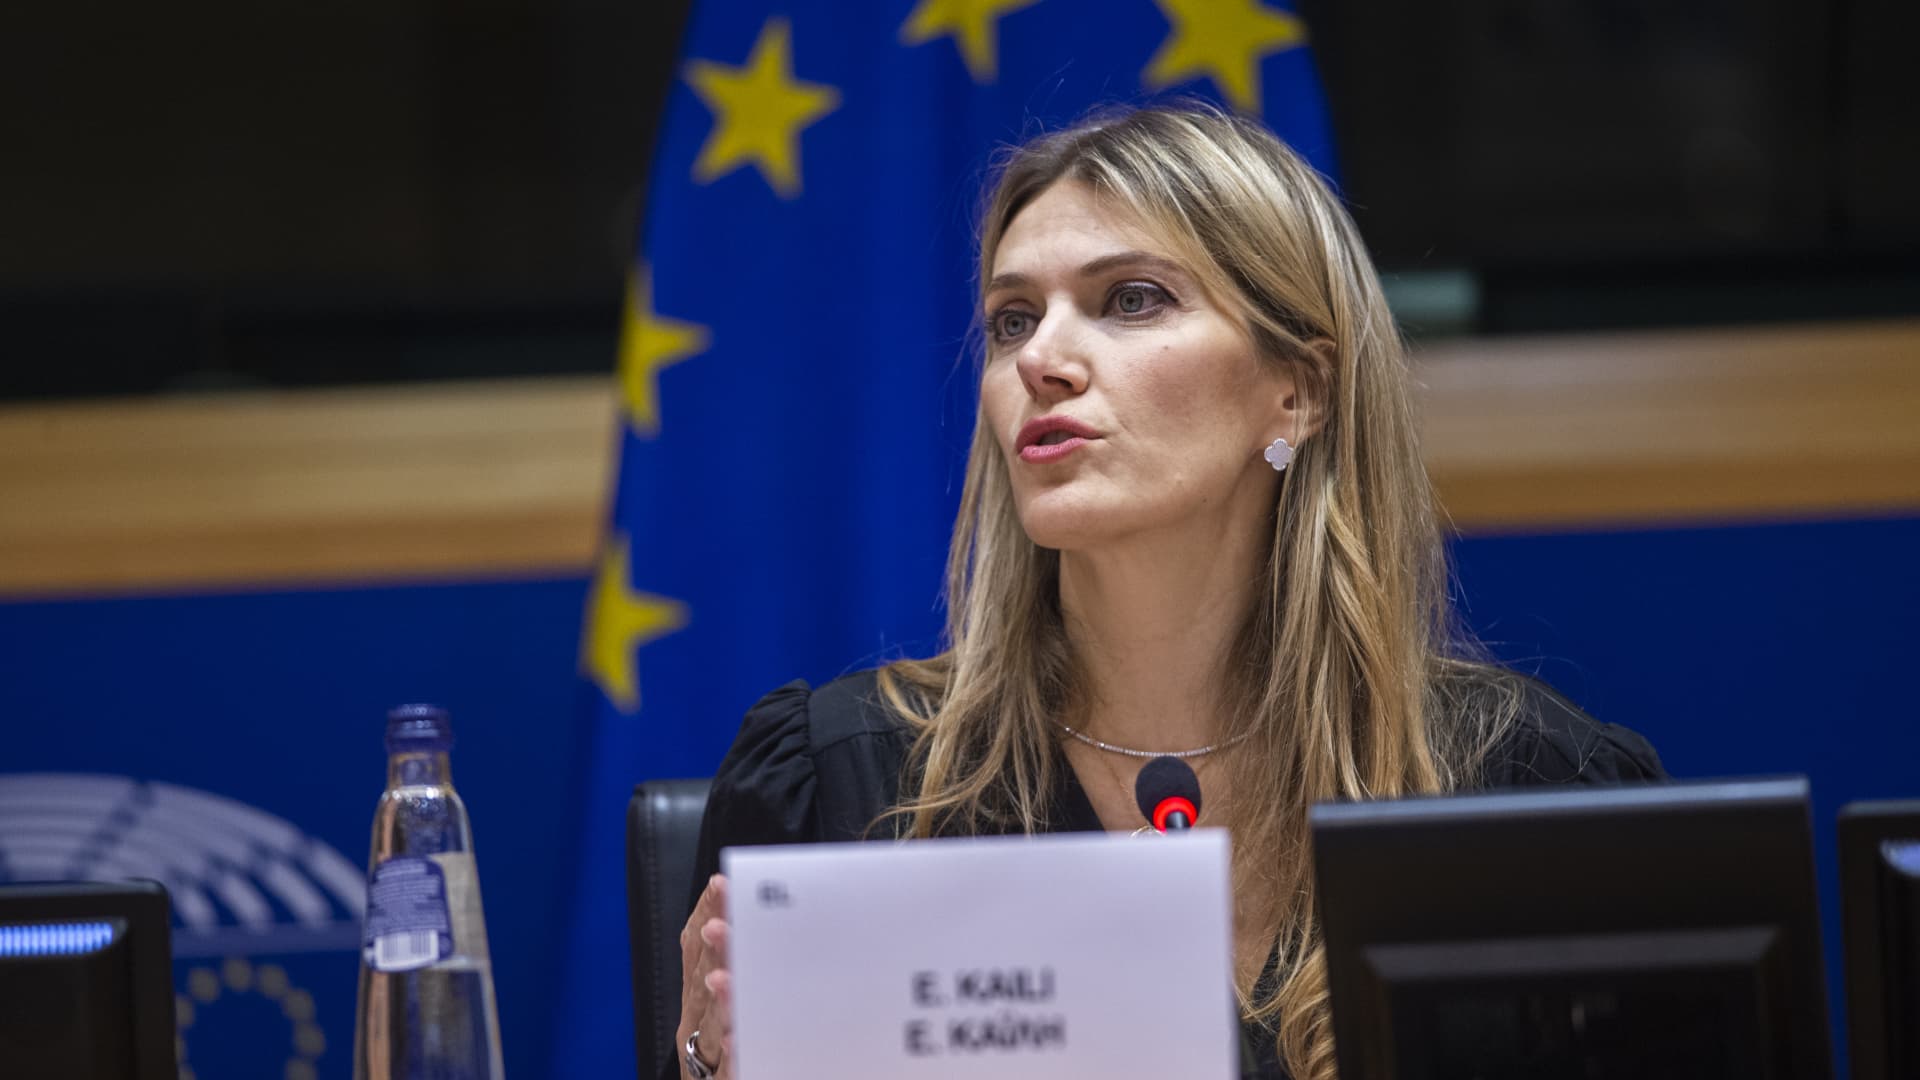 European Parliament removes Eva Kaili as vice-president after Qatar corruption allegations